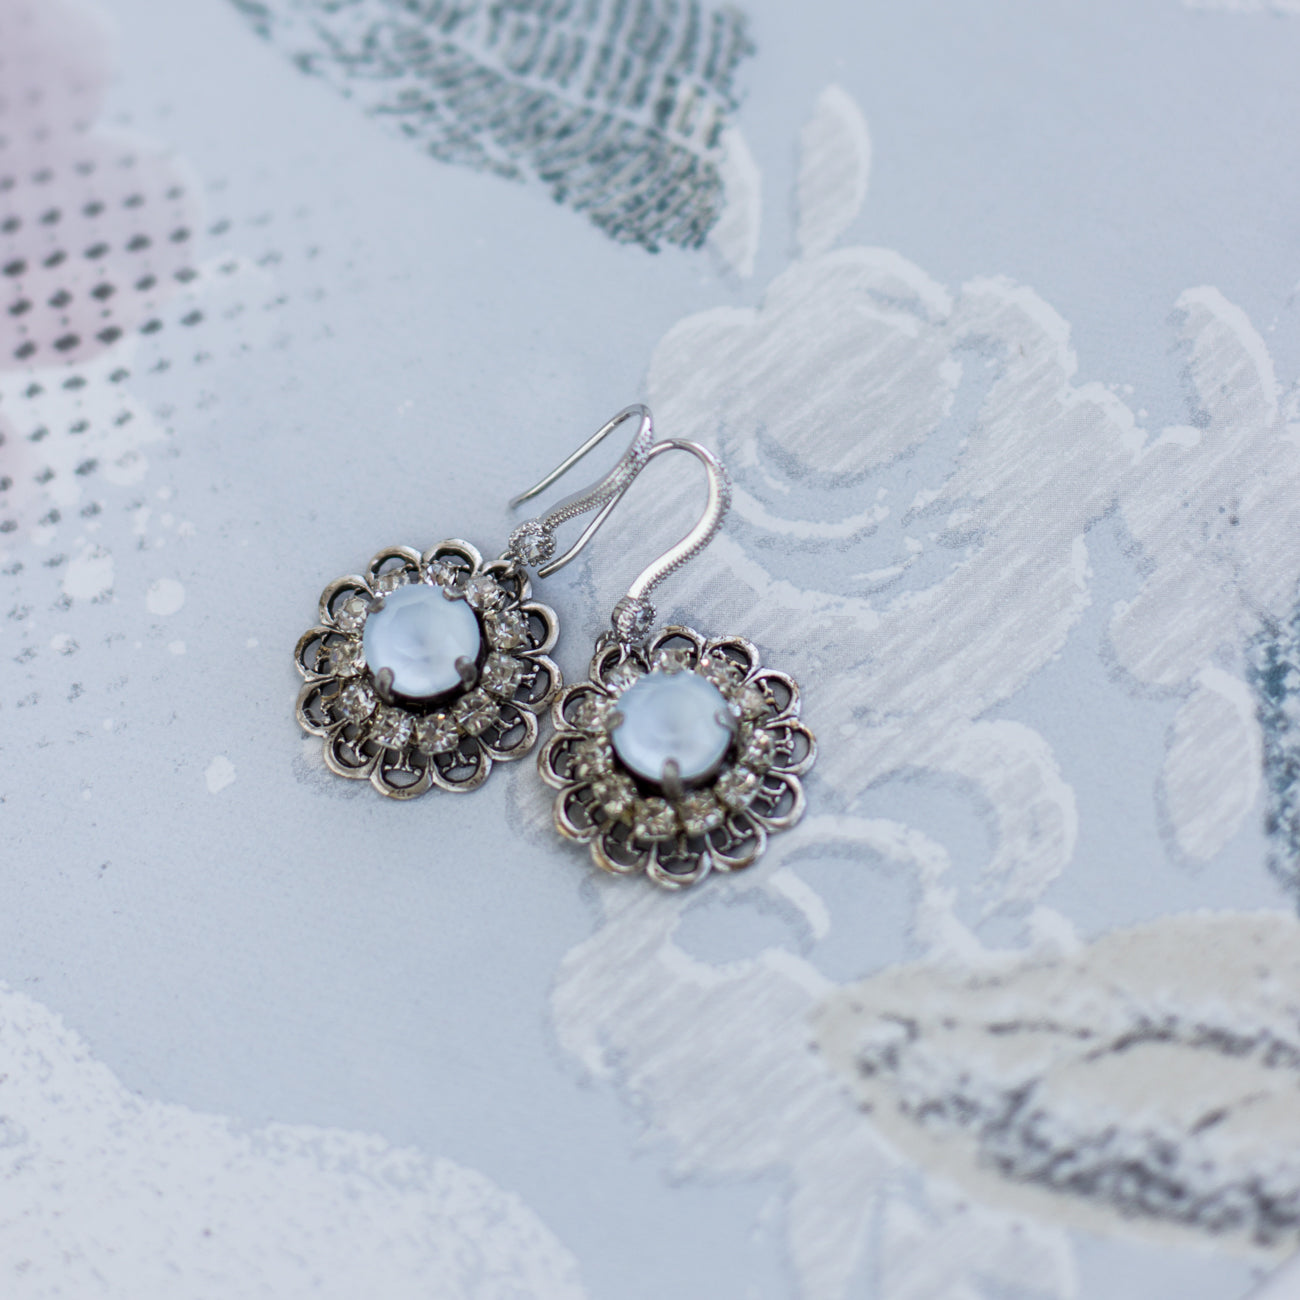 Small crystal earrings. Light blue jewelry. Swarovski crystal earrings. Baby blue, powder blue accessories. Classic timeless elegance for summer.